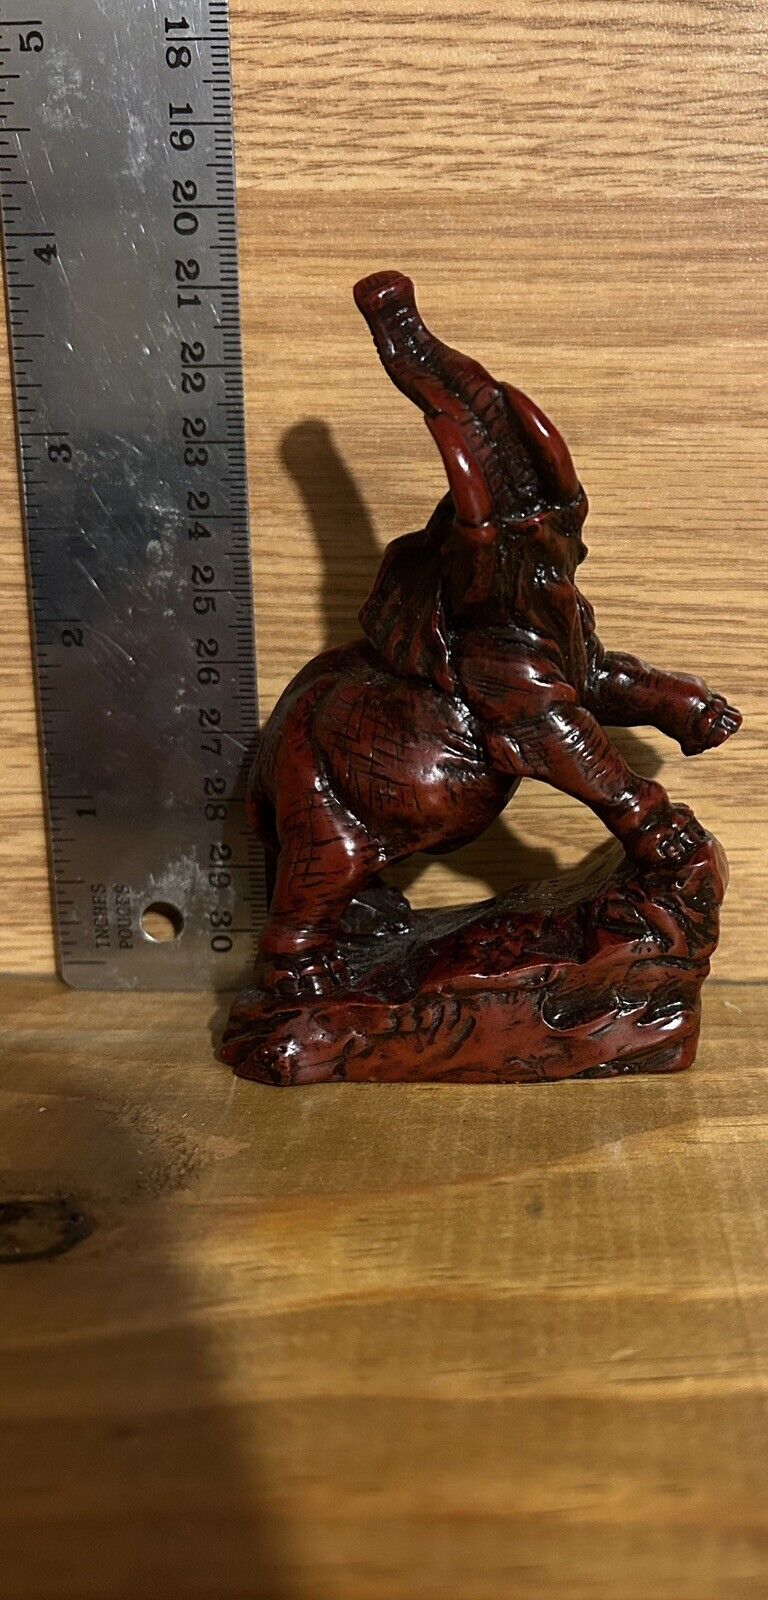 4” Vintage Red Resin Elephant Figurine with Trunk Up